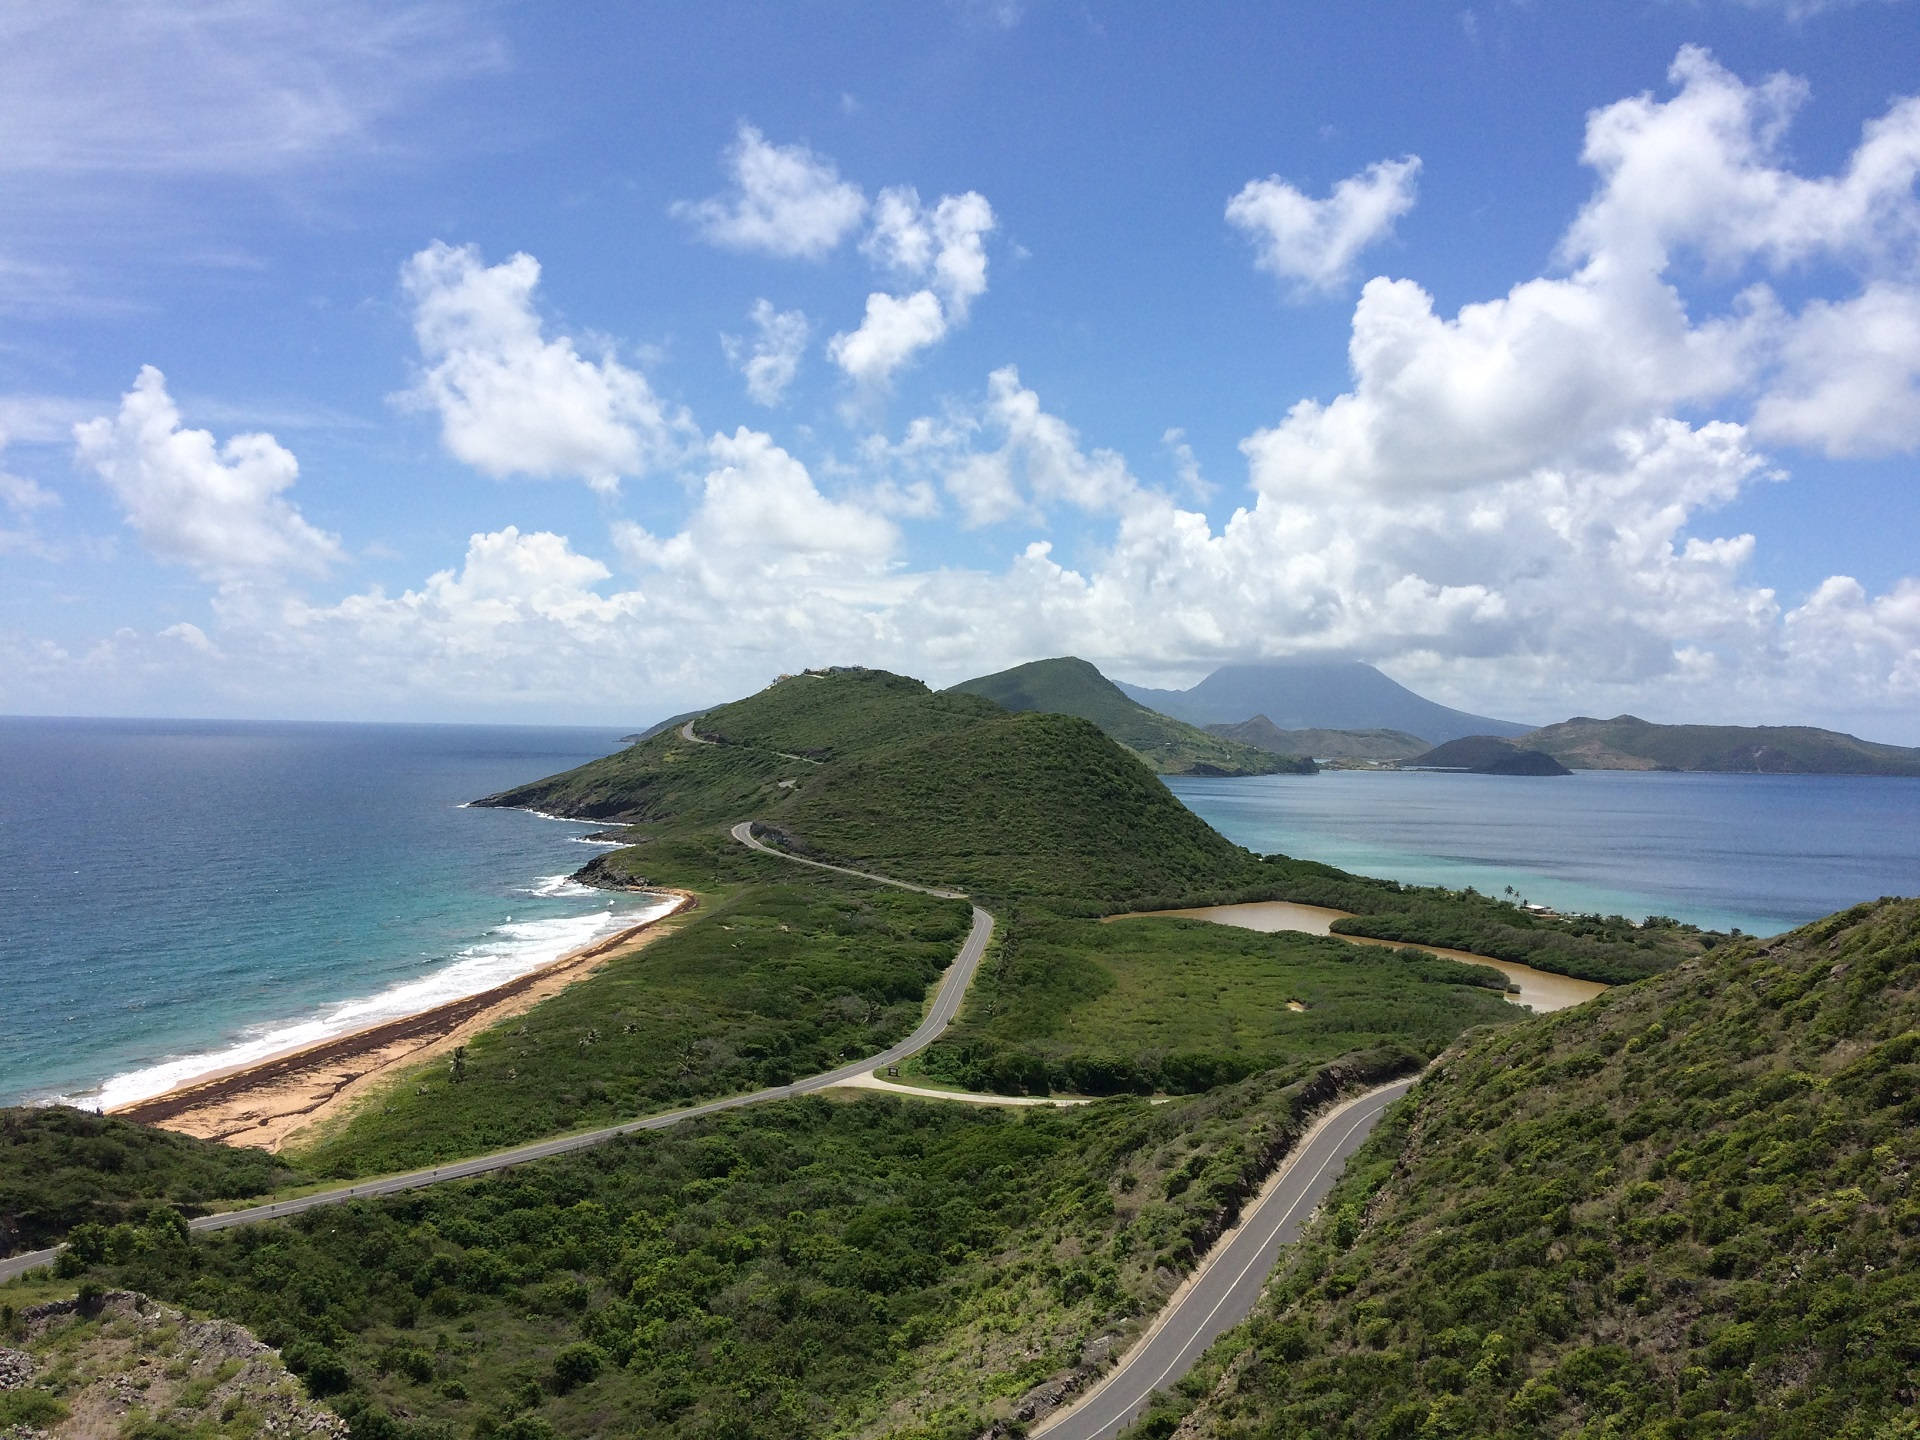 Download St Kitts And Nevis Island With Roads Wallpaper | Wallpapers.com